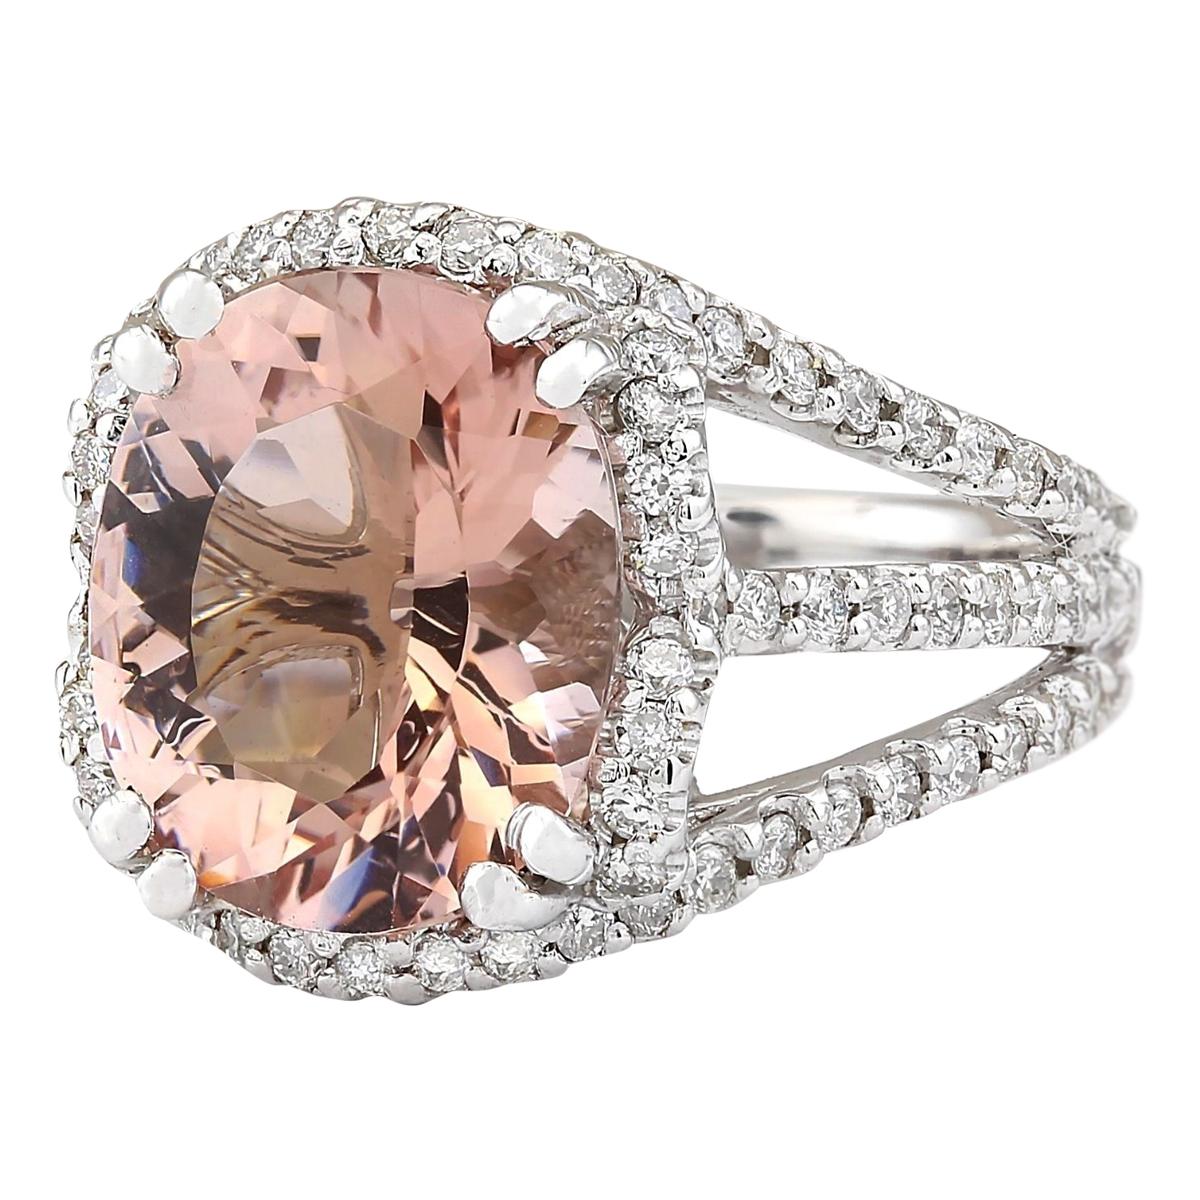 Discover exquisite beauty with our 14K White Gold Diamond Ring, featuring a stunning 5.91 Carat Natural Morganite centerpiece, elegantly set in a 14K white gold band. The Morganite stone, measuring 12.00x10.00 mm, exudes a captivating peach hue,